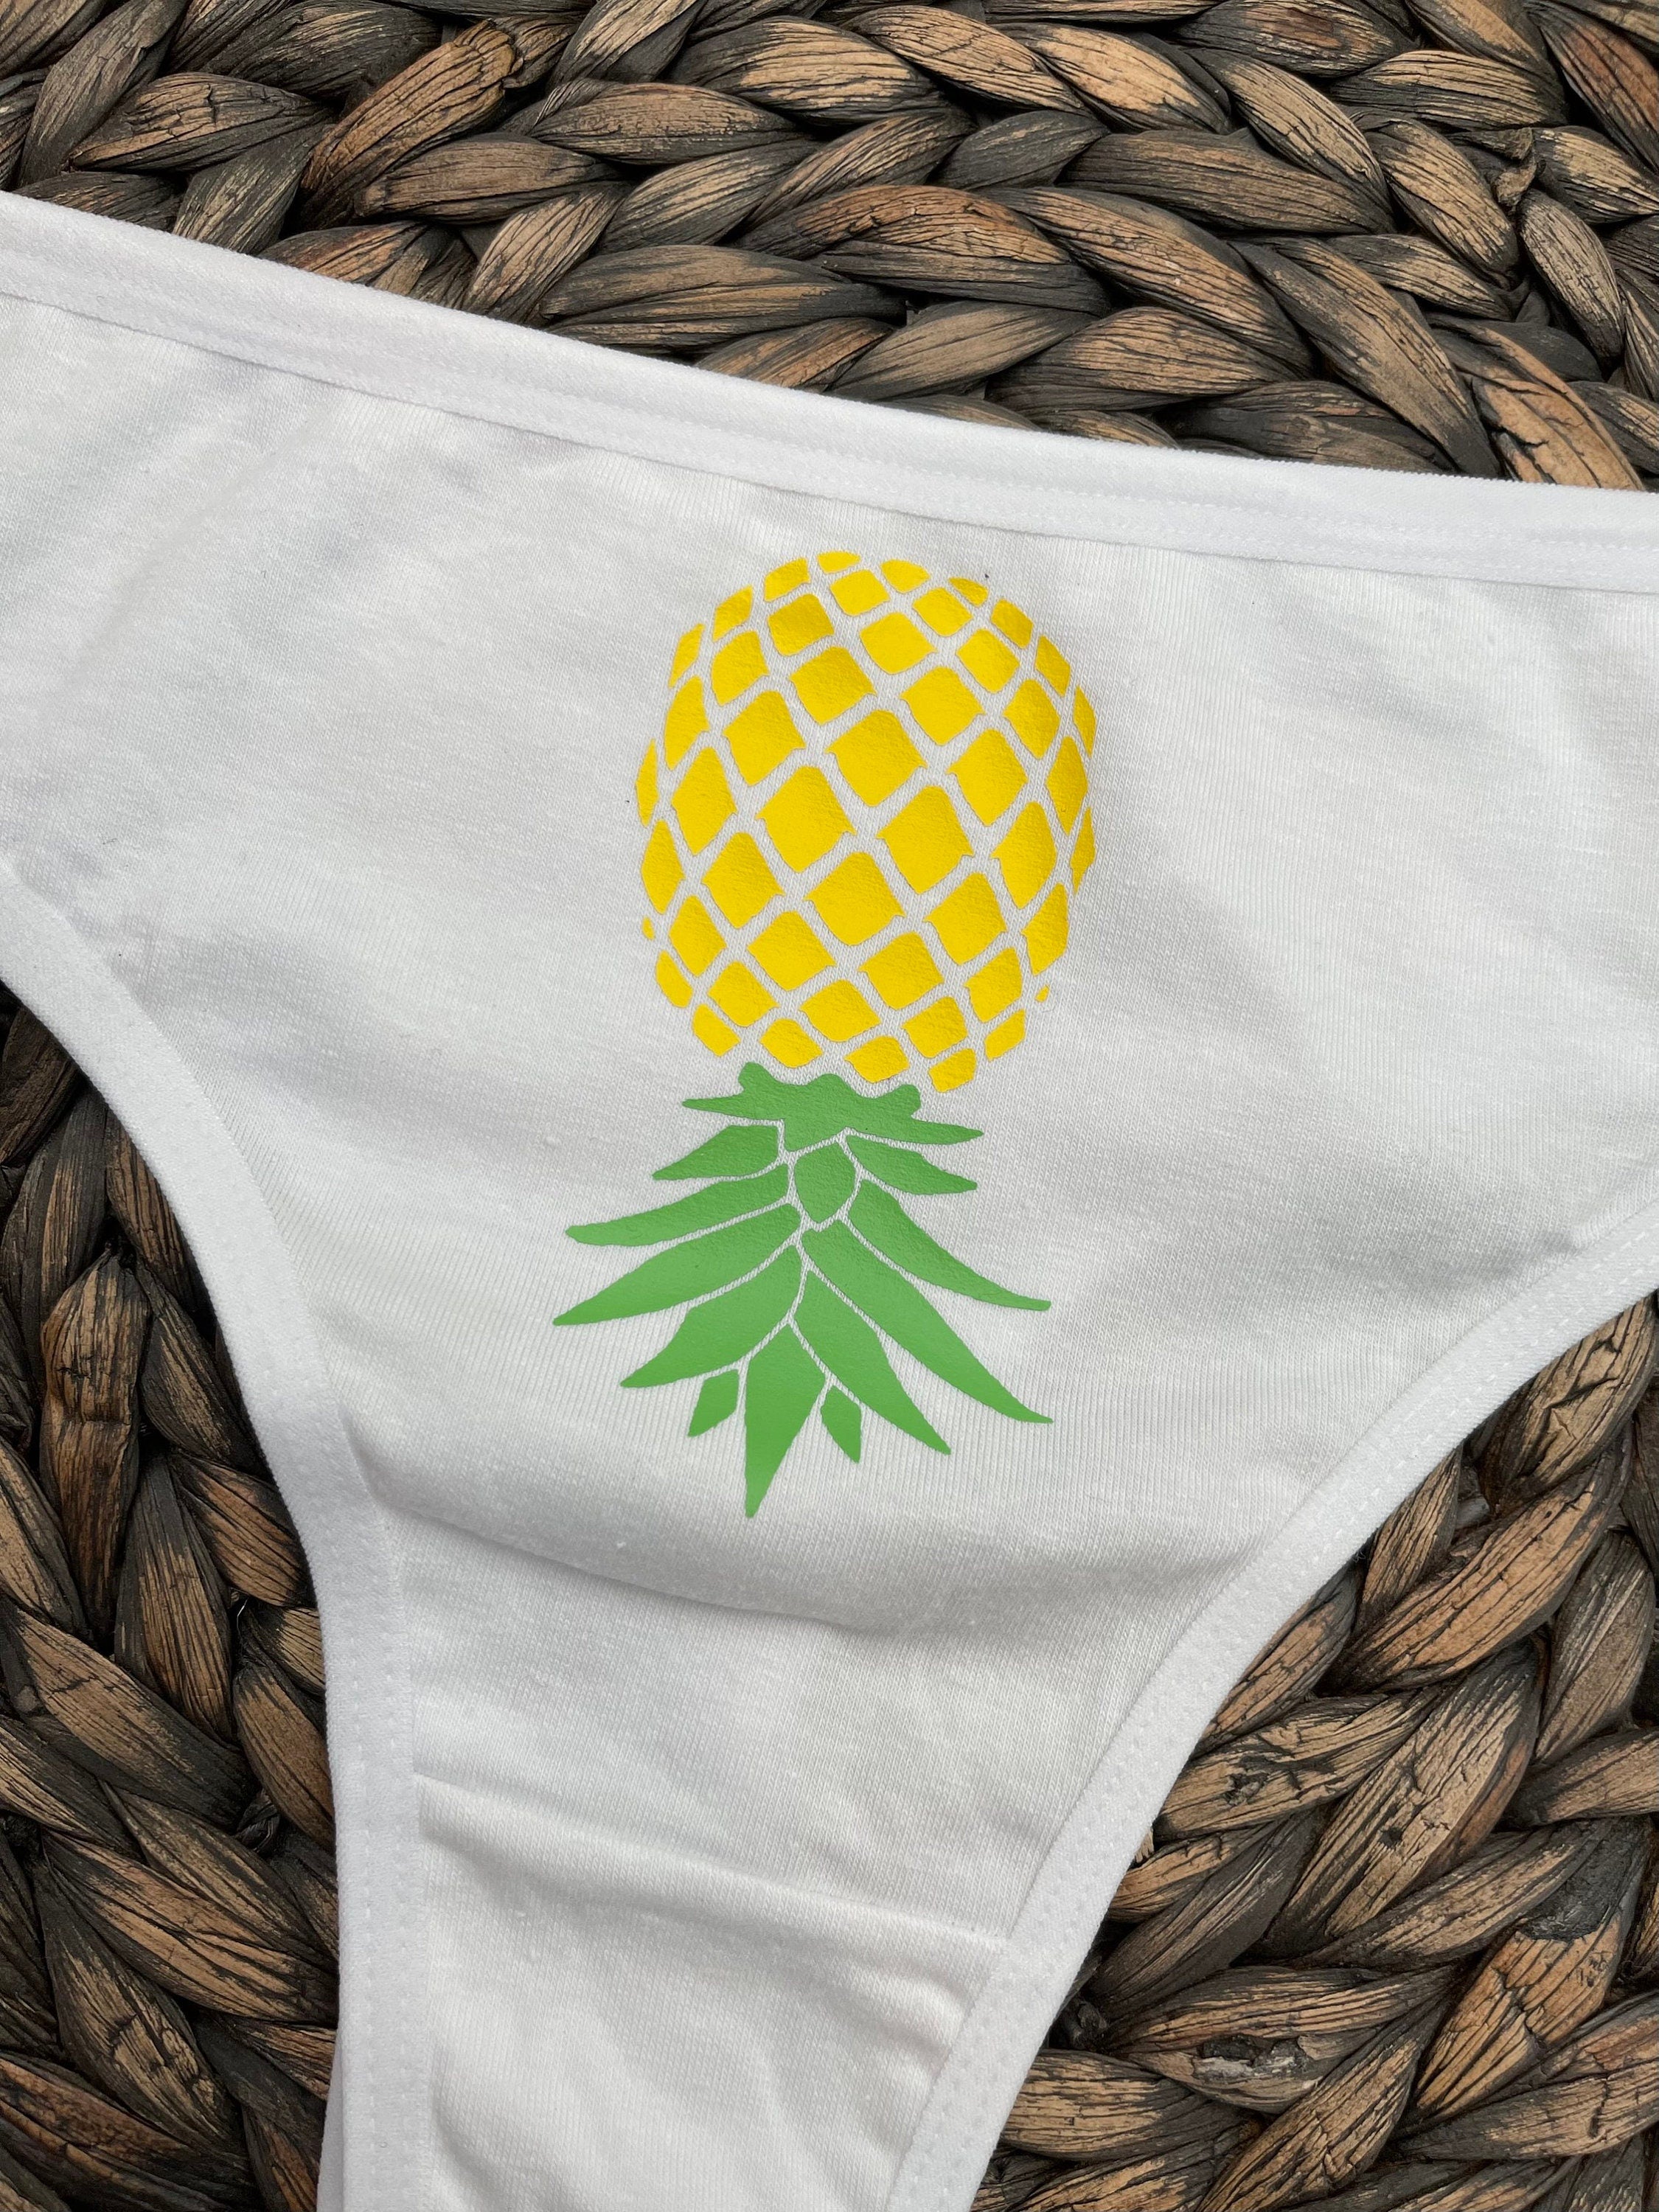 Cute Upside Down Pineapple Thong - Playful Lingerie for Swingers